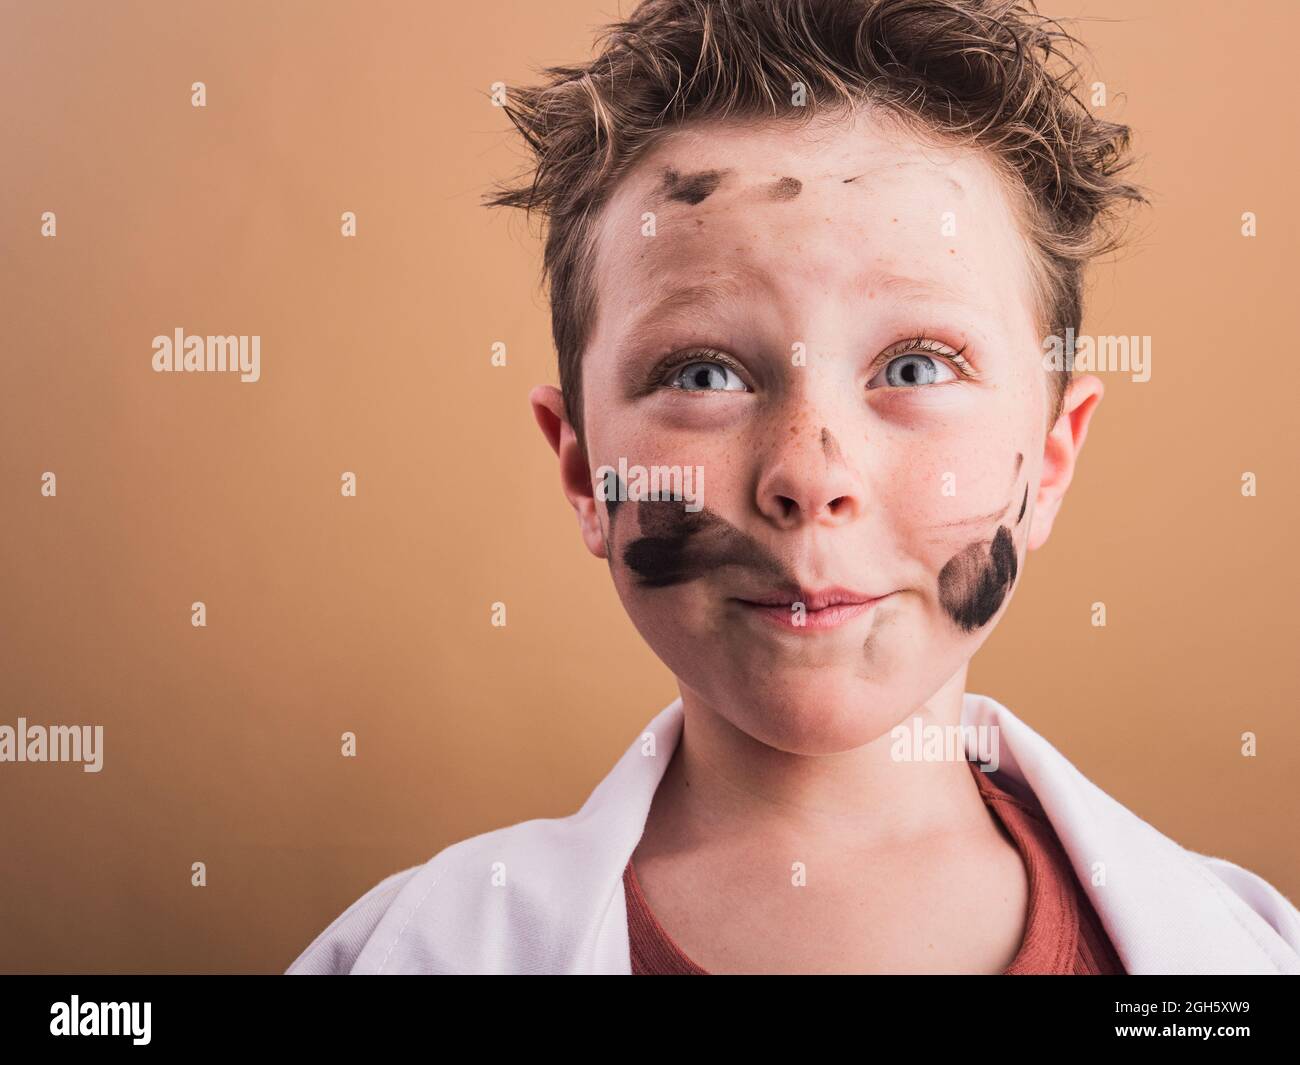 Pondering child with blue eyes and paint blots on face looking up on beige background Stock Photo